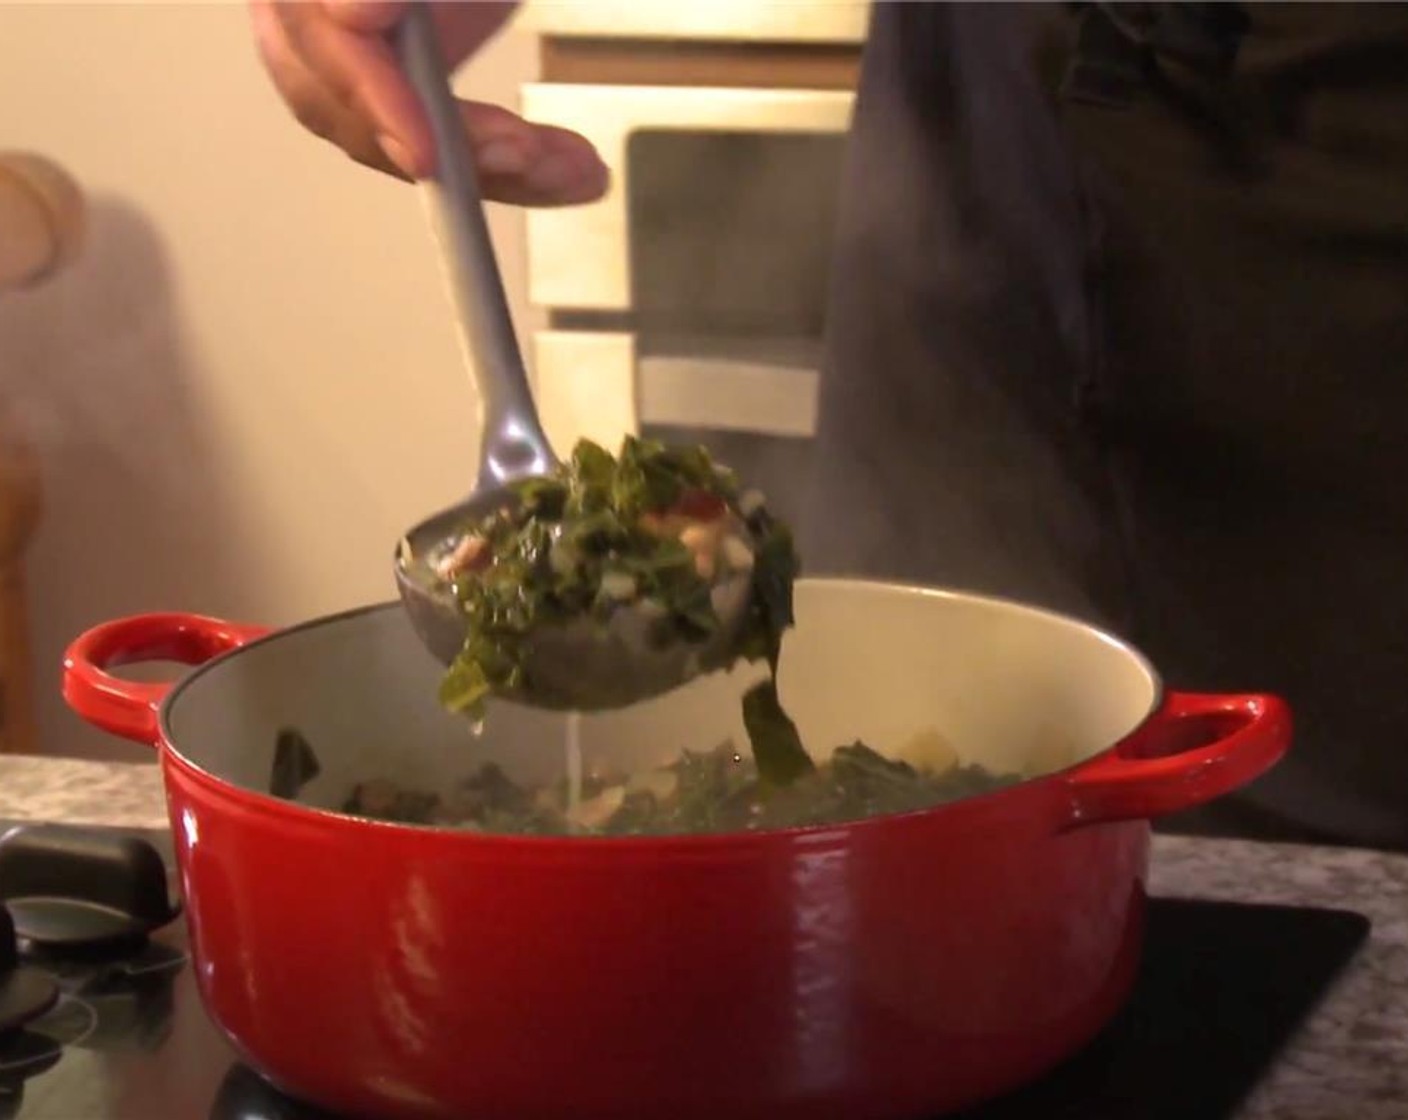 step 6 Cover and cook for 10 minutes or until the kale is tender, stirring occasionally.